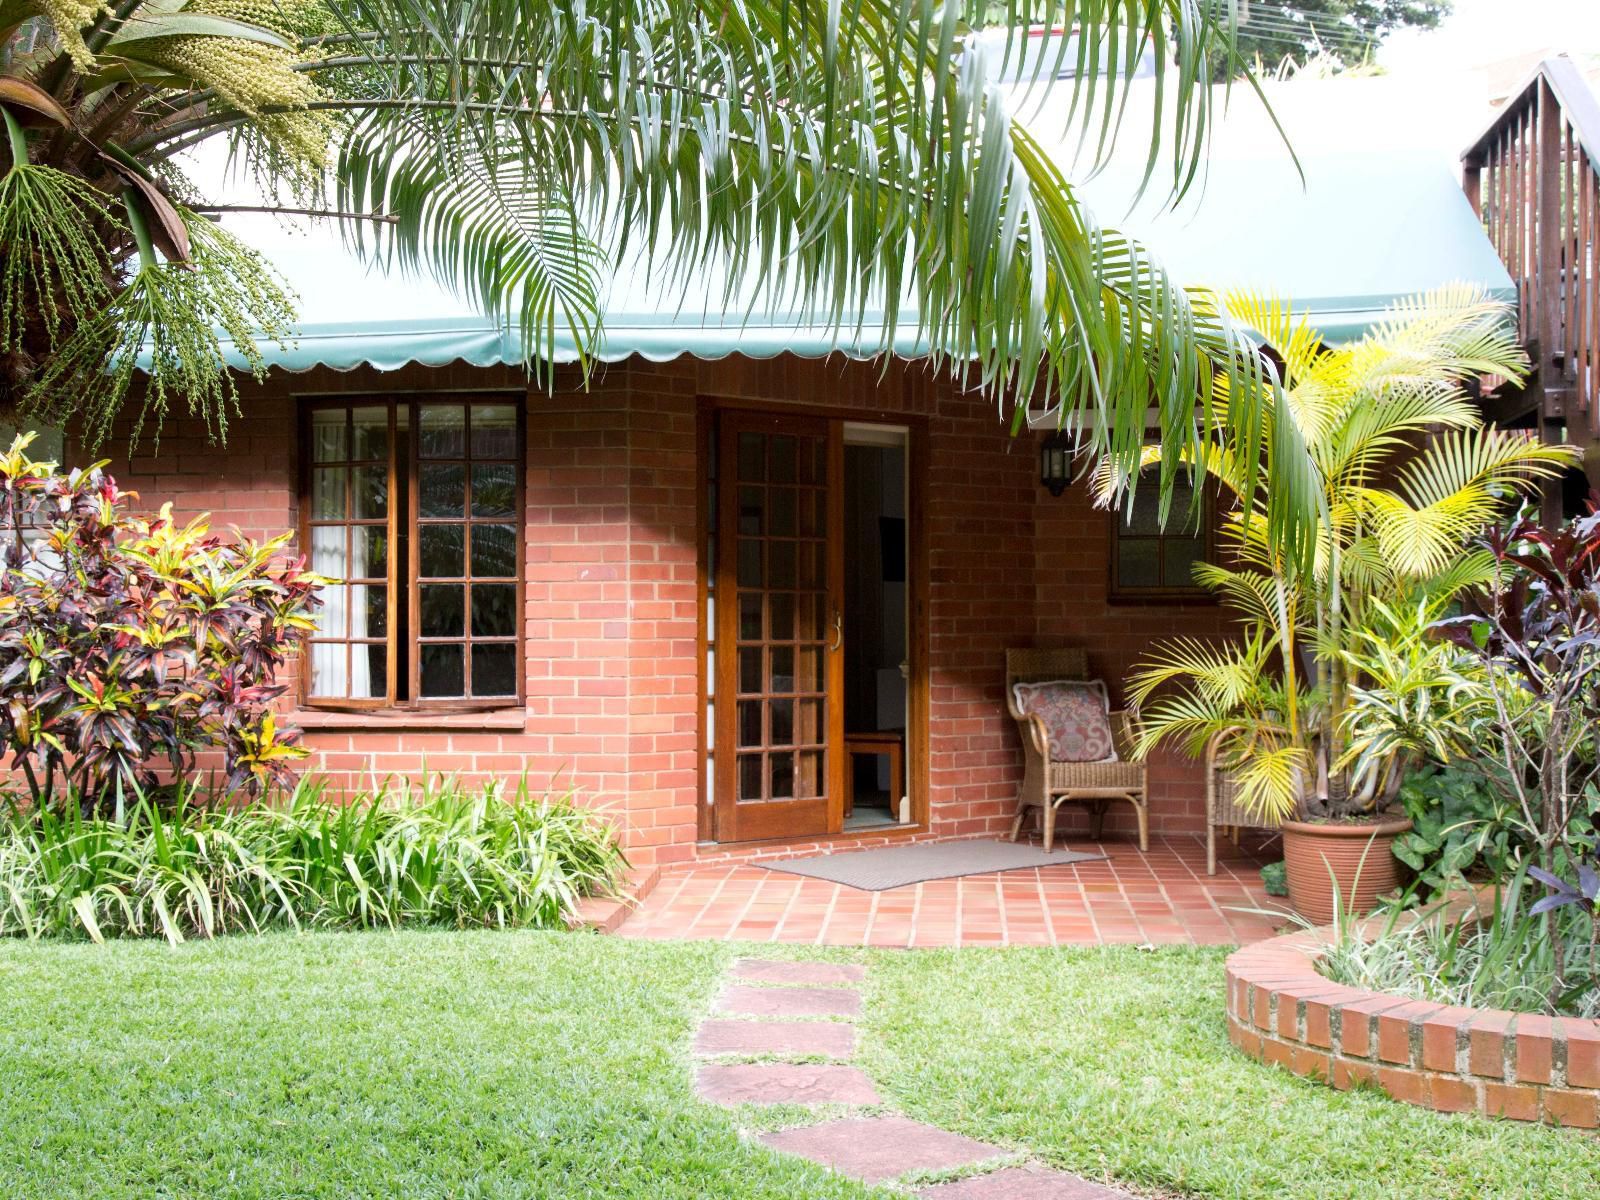 Ridgeview Lodge Berea Durban Kwazulu Natal South Africa House, Building, Architecture, Palm Tree, Plant, Nature, Wood